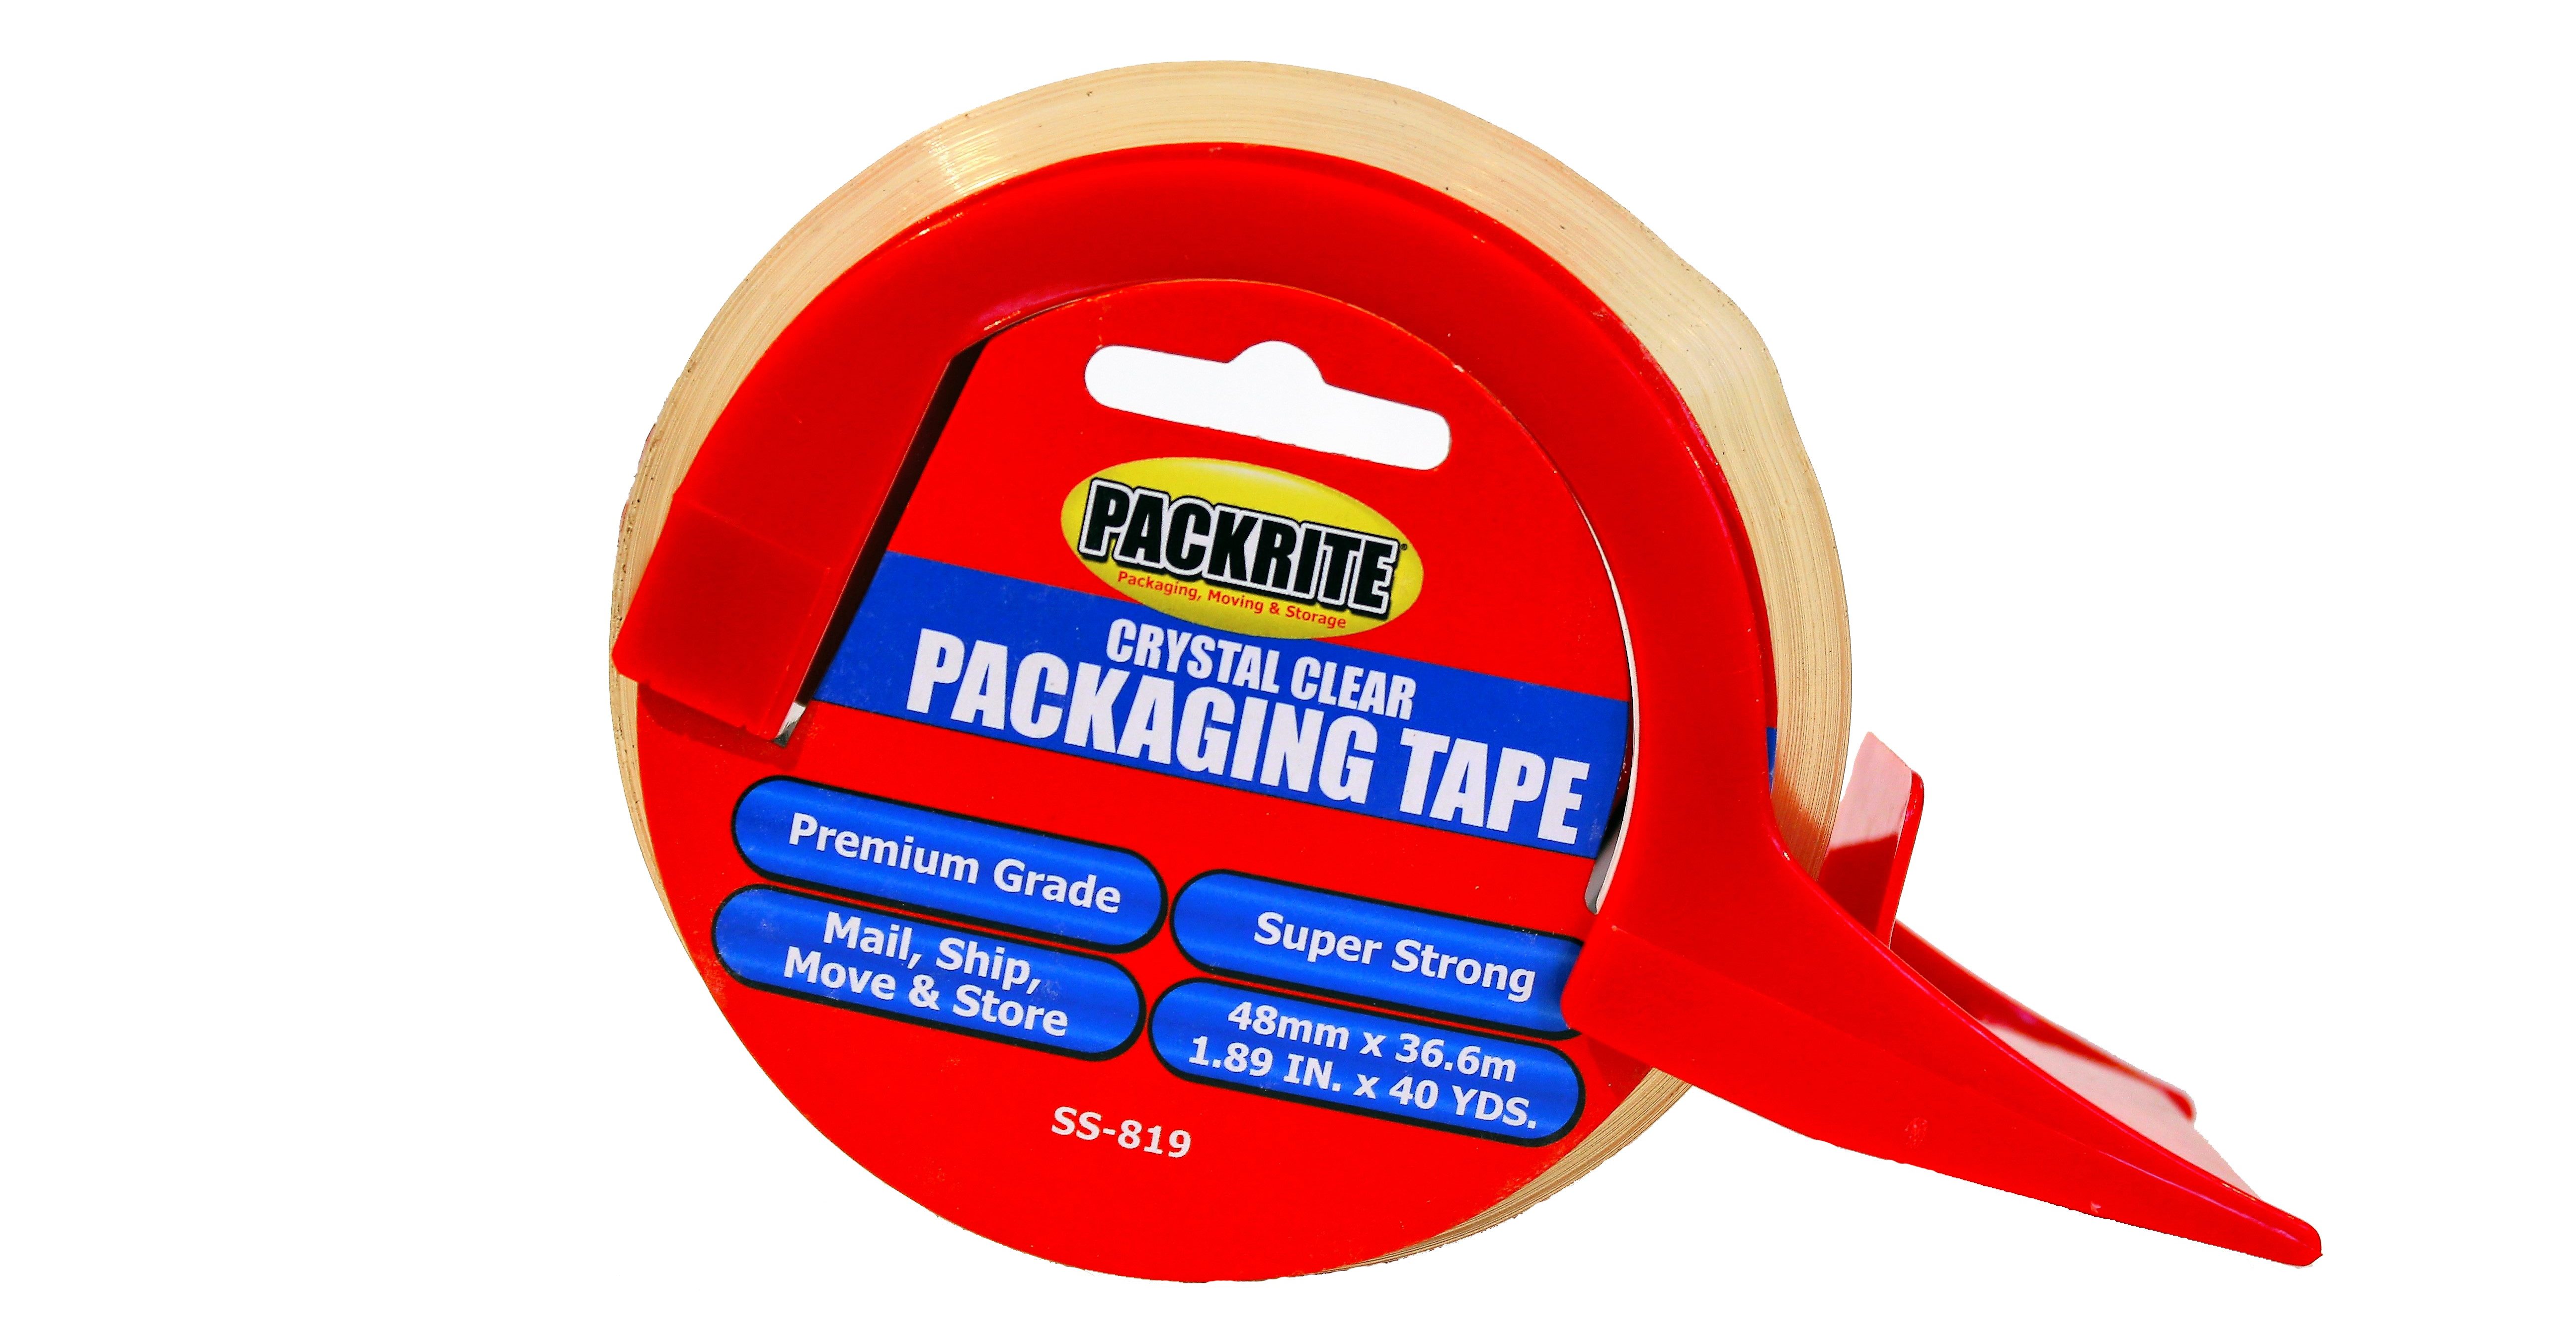 PACKRITE Crystal Clear Packing Tape, Premium Grade, Super Strong, Mail, Ship, Move & Store